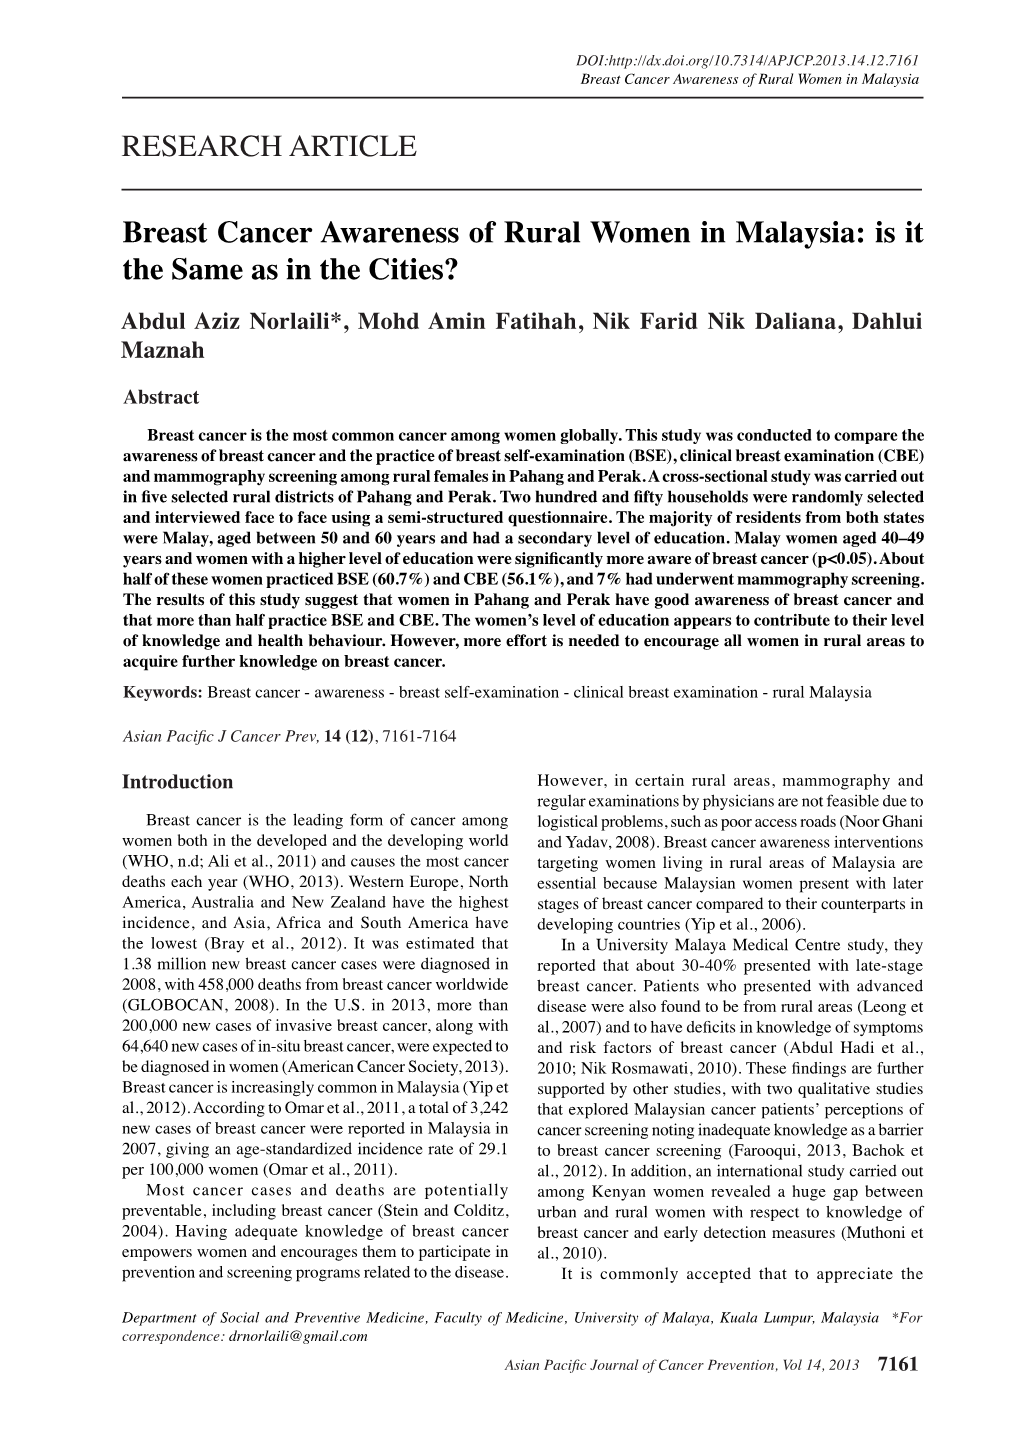 Breast Cancer Awareness of Rural Women in Malaysia